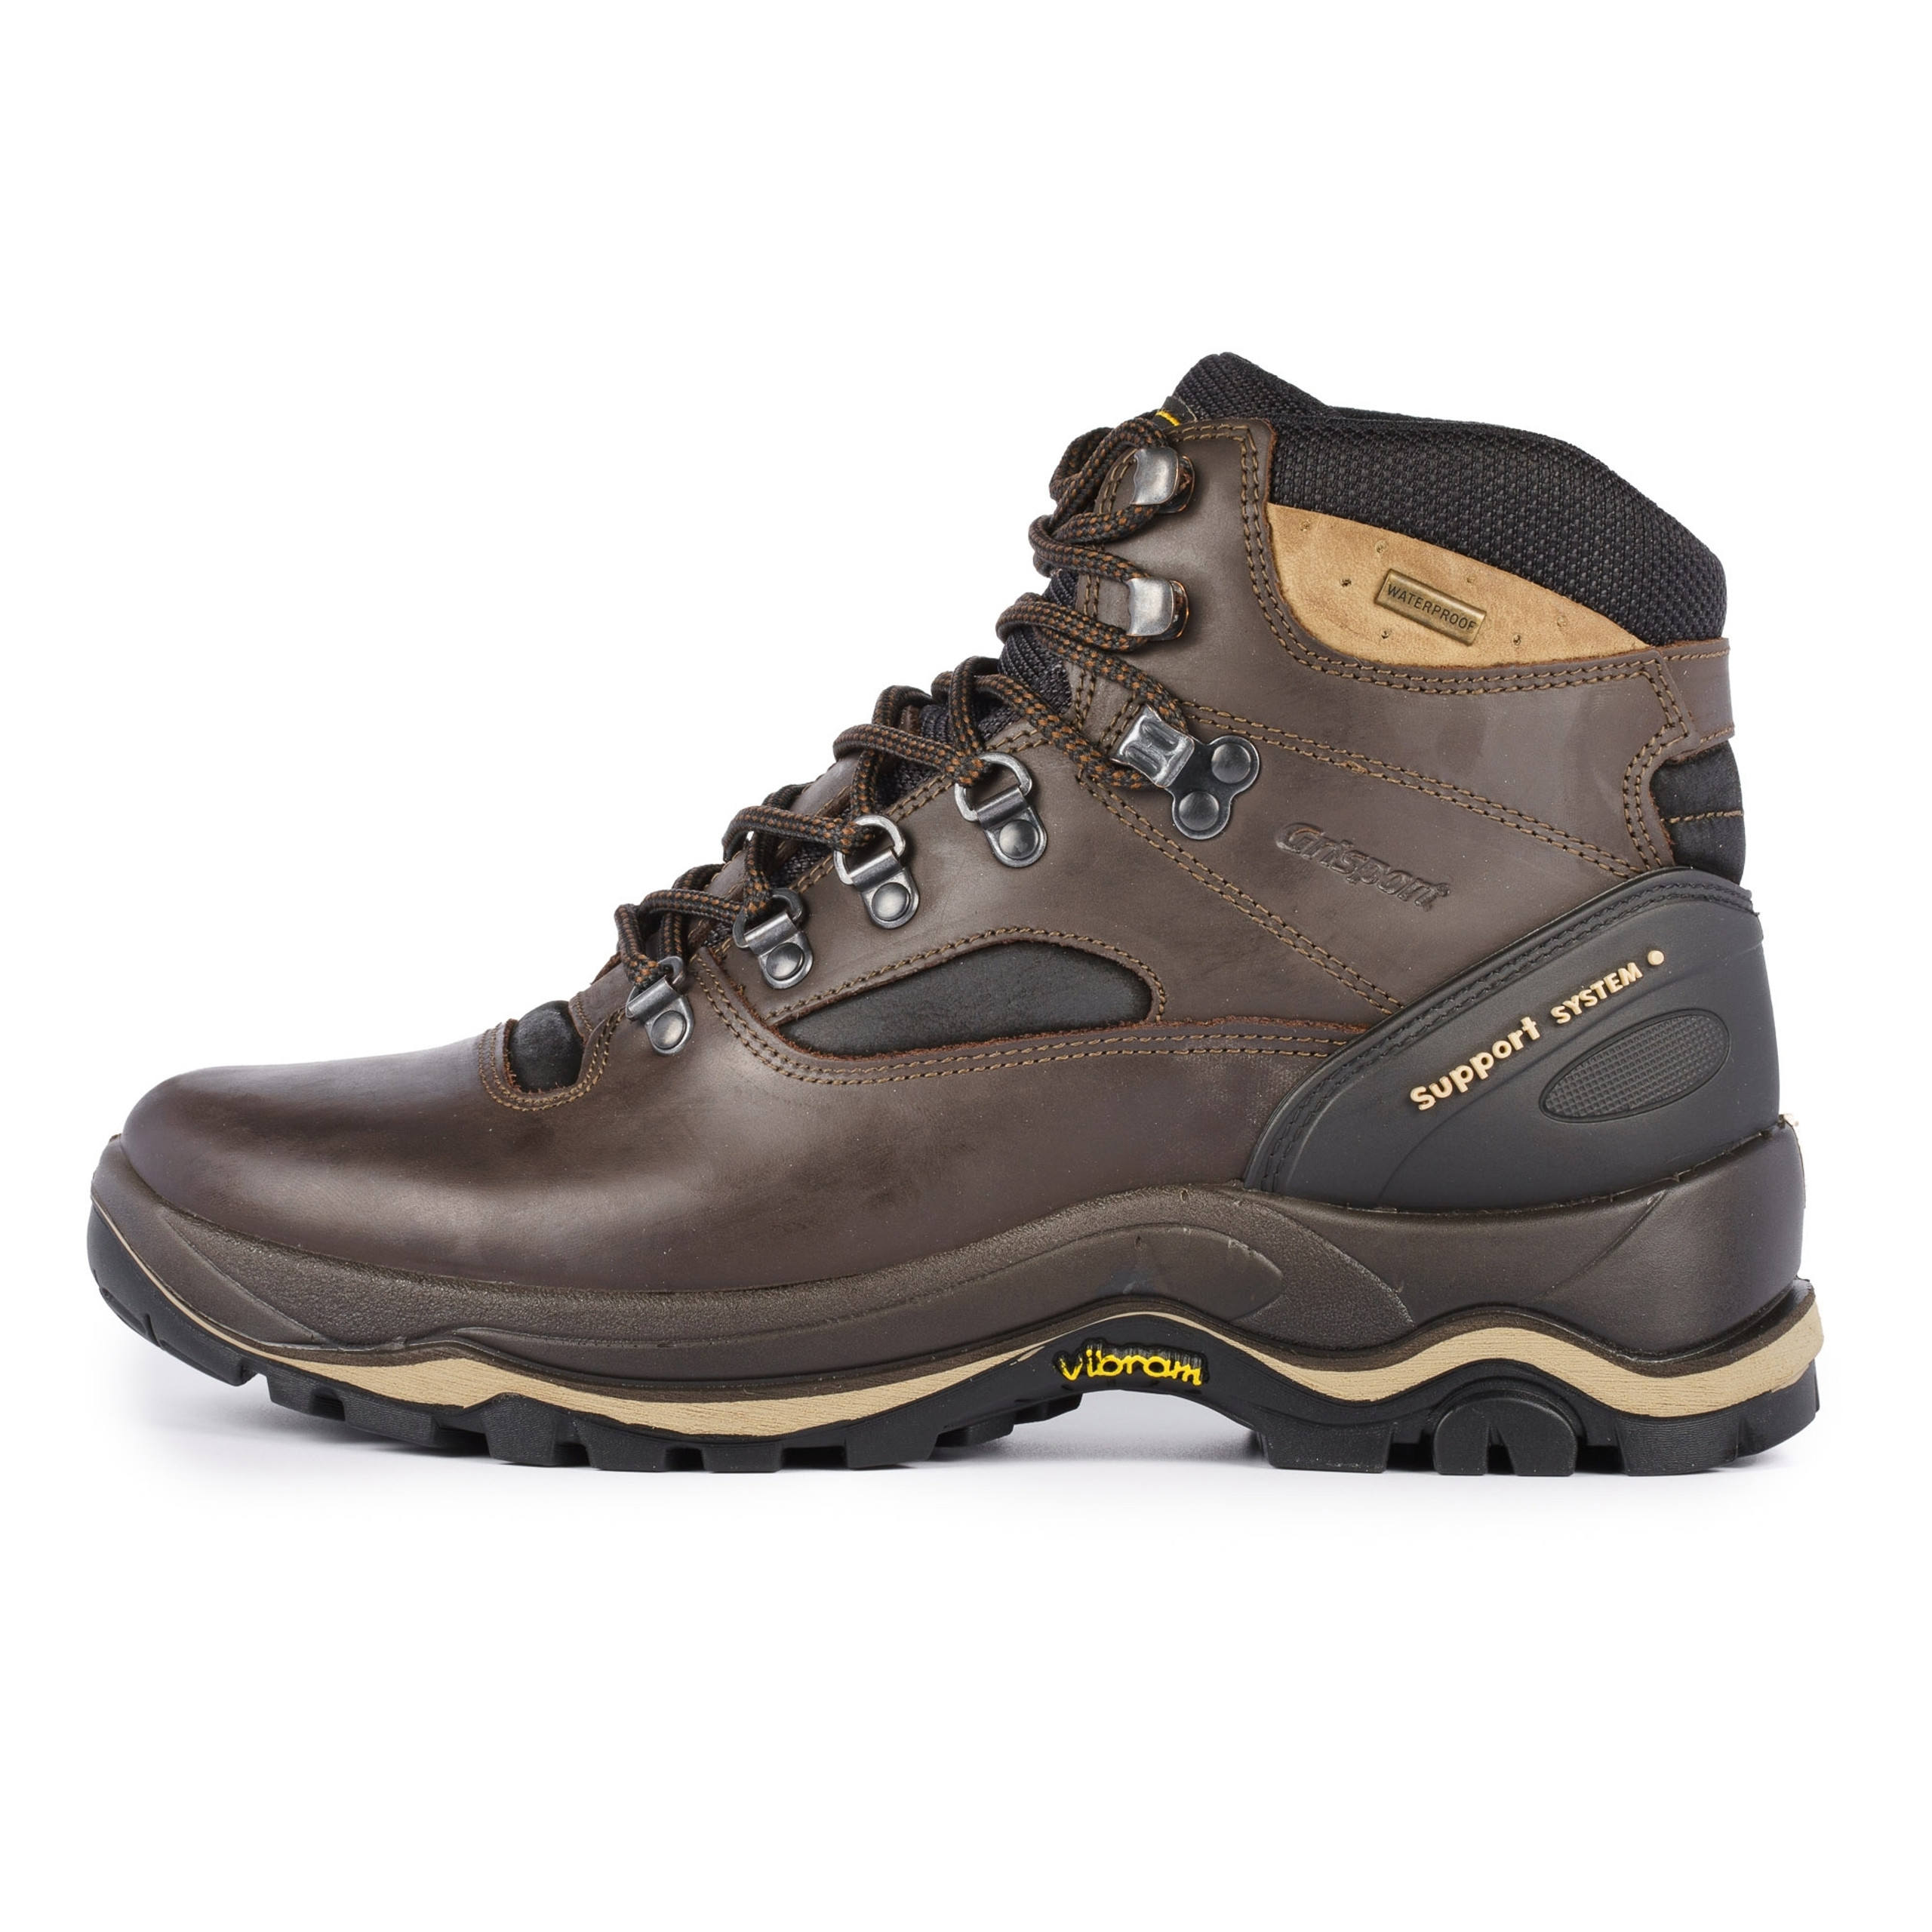 Grisport Quatro Boots | Cherry Tree Country Clothing